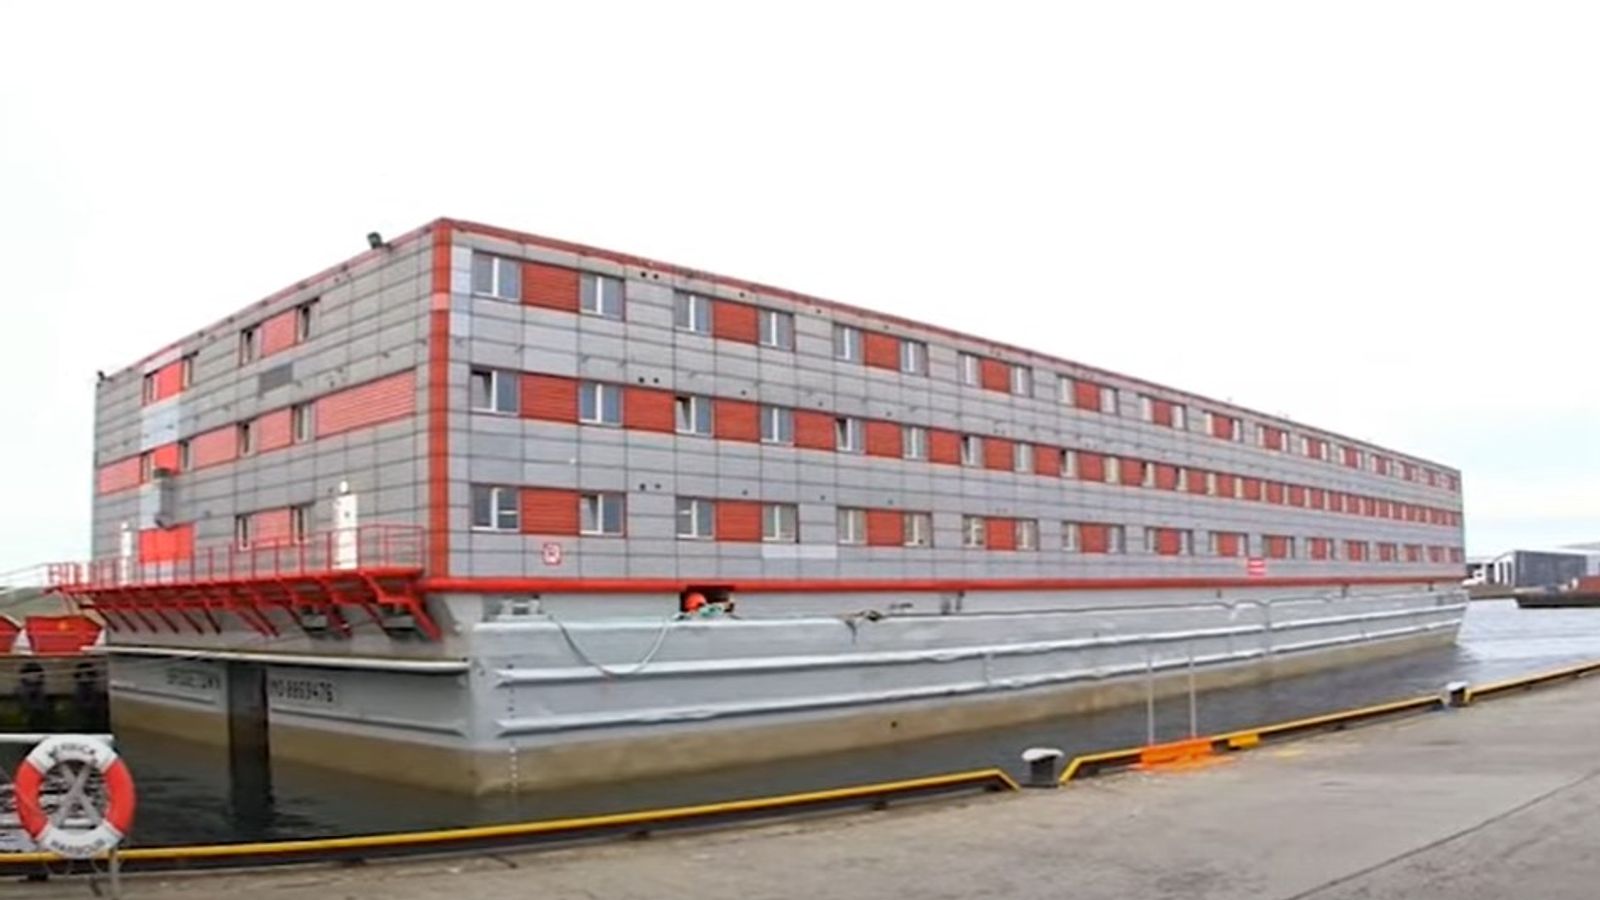 Giant barge could be used to house 500 asylum seekers